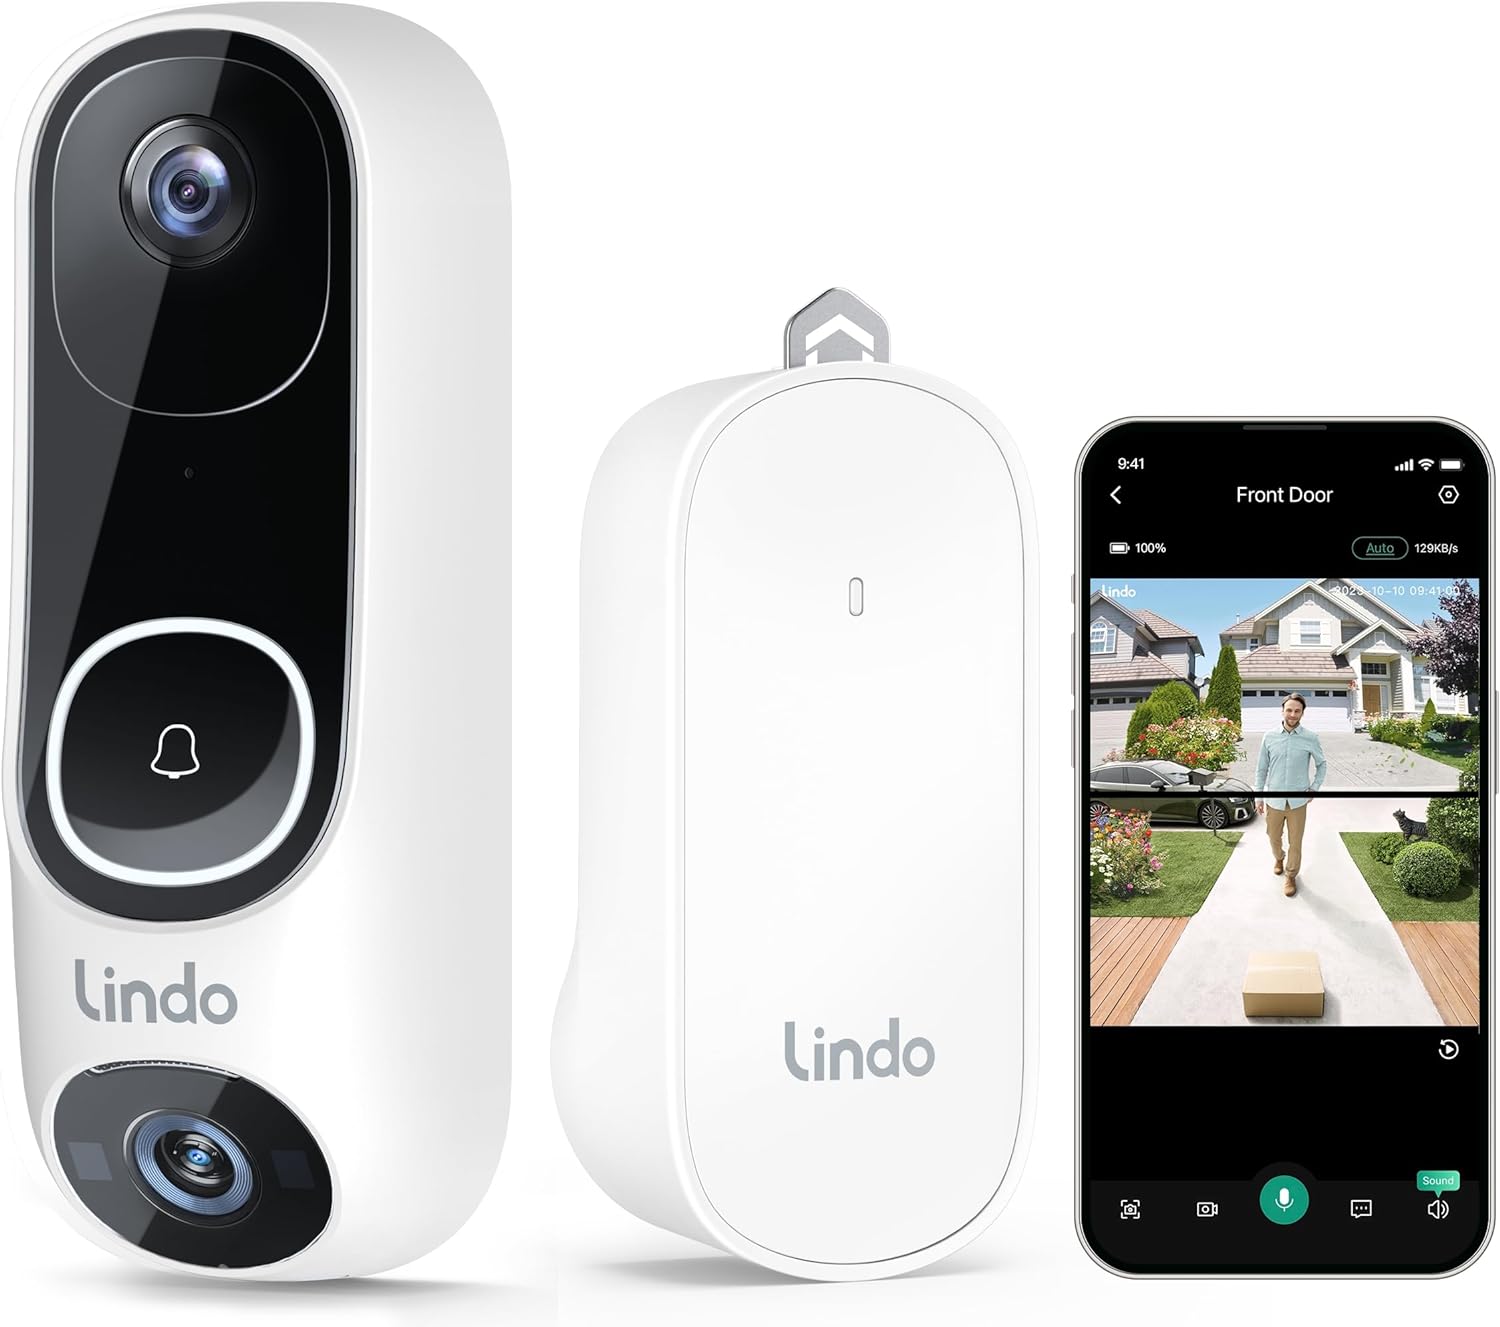 Lindo Pro Dual Camera Video Doorbell 2K with Chime, Free Video History, Over 190° Widest Field of View, 5MP Ultra HD Wireless Doorbell Camera